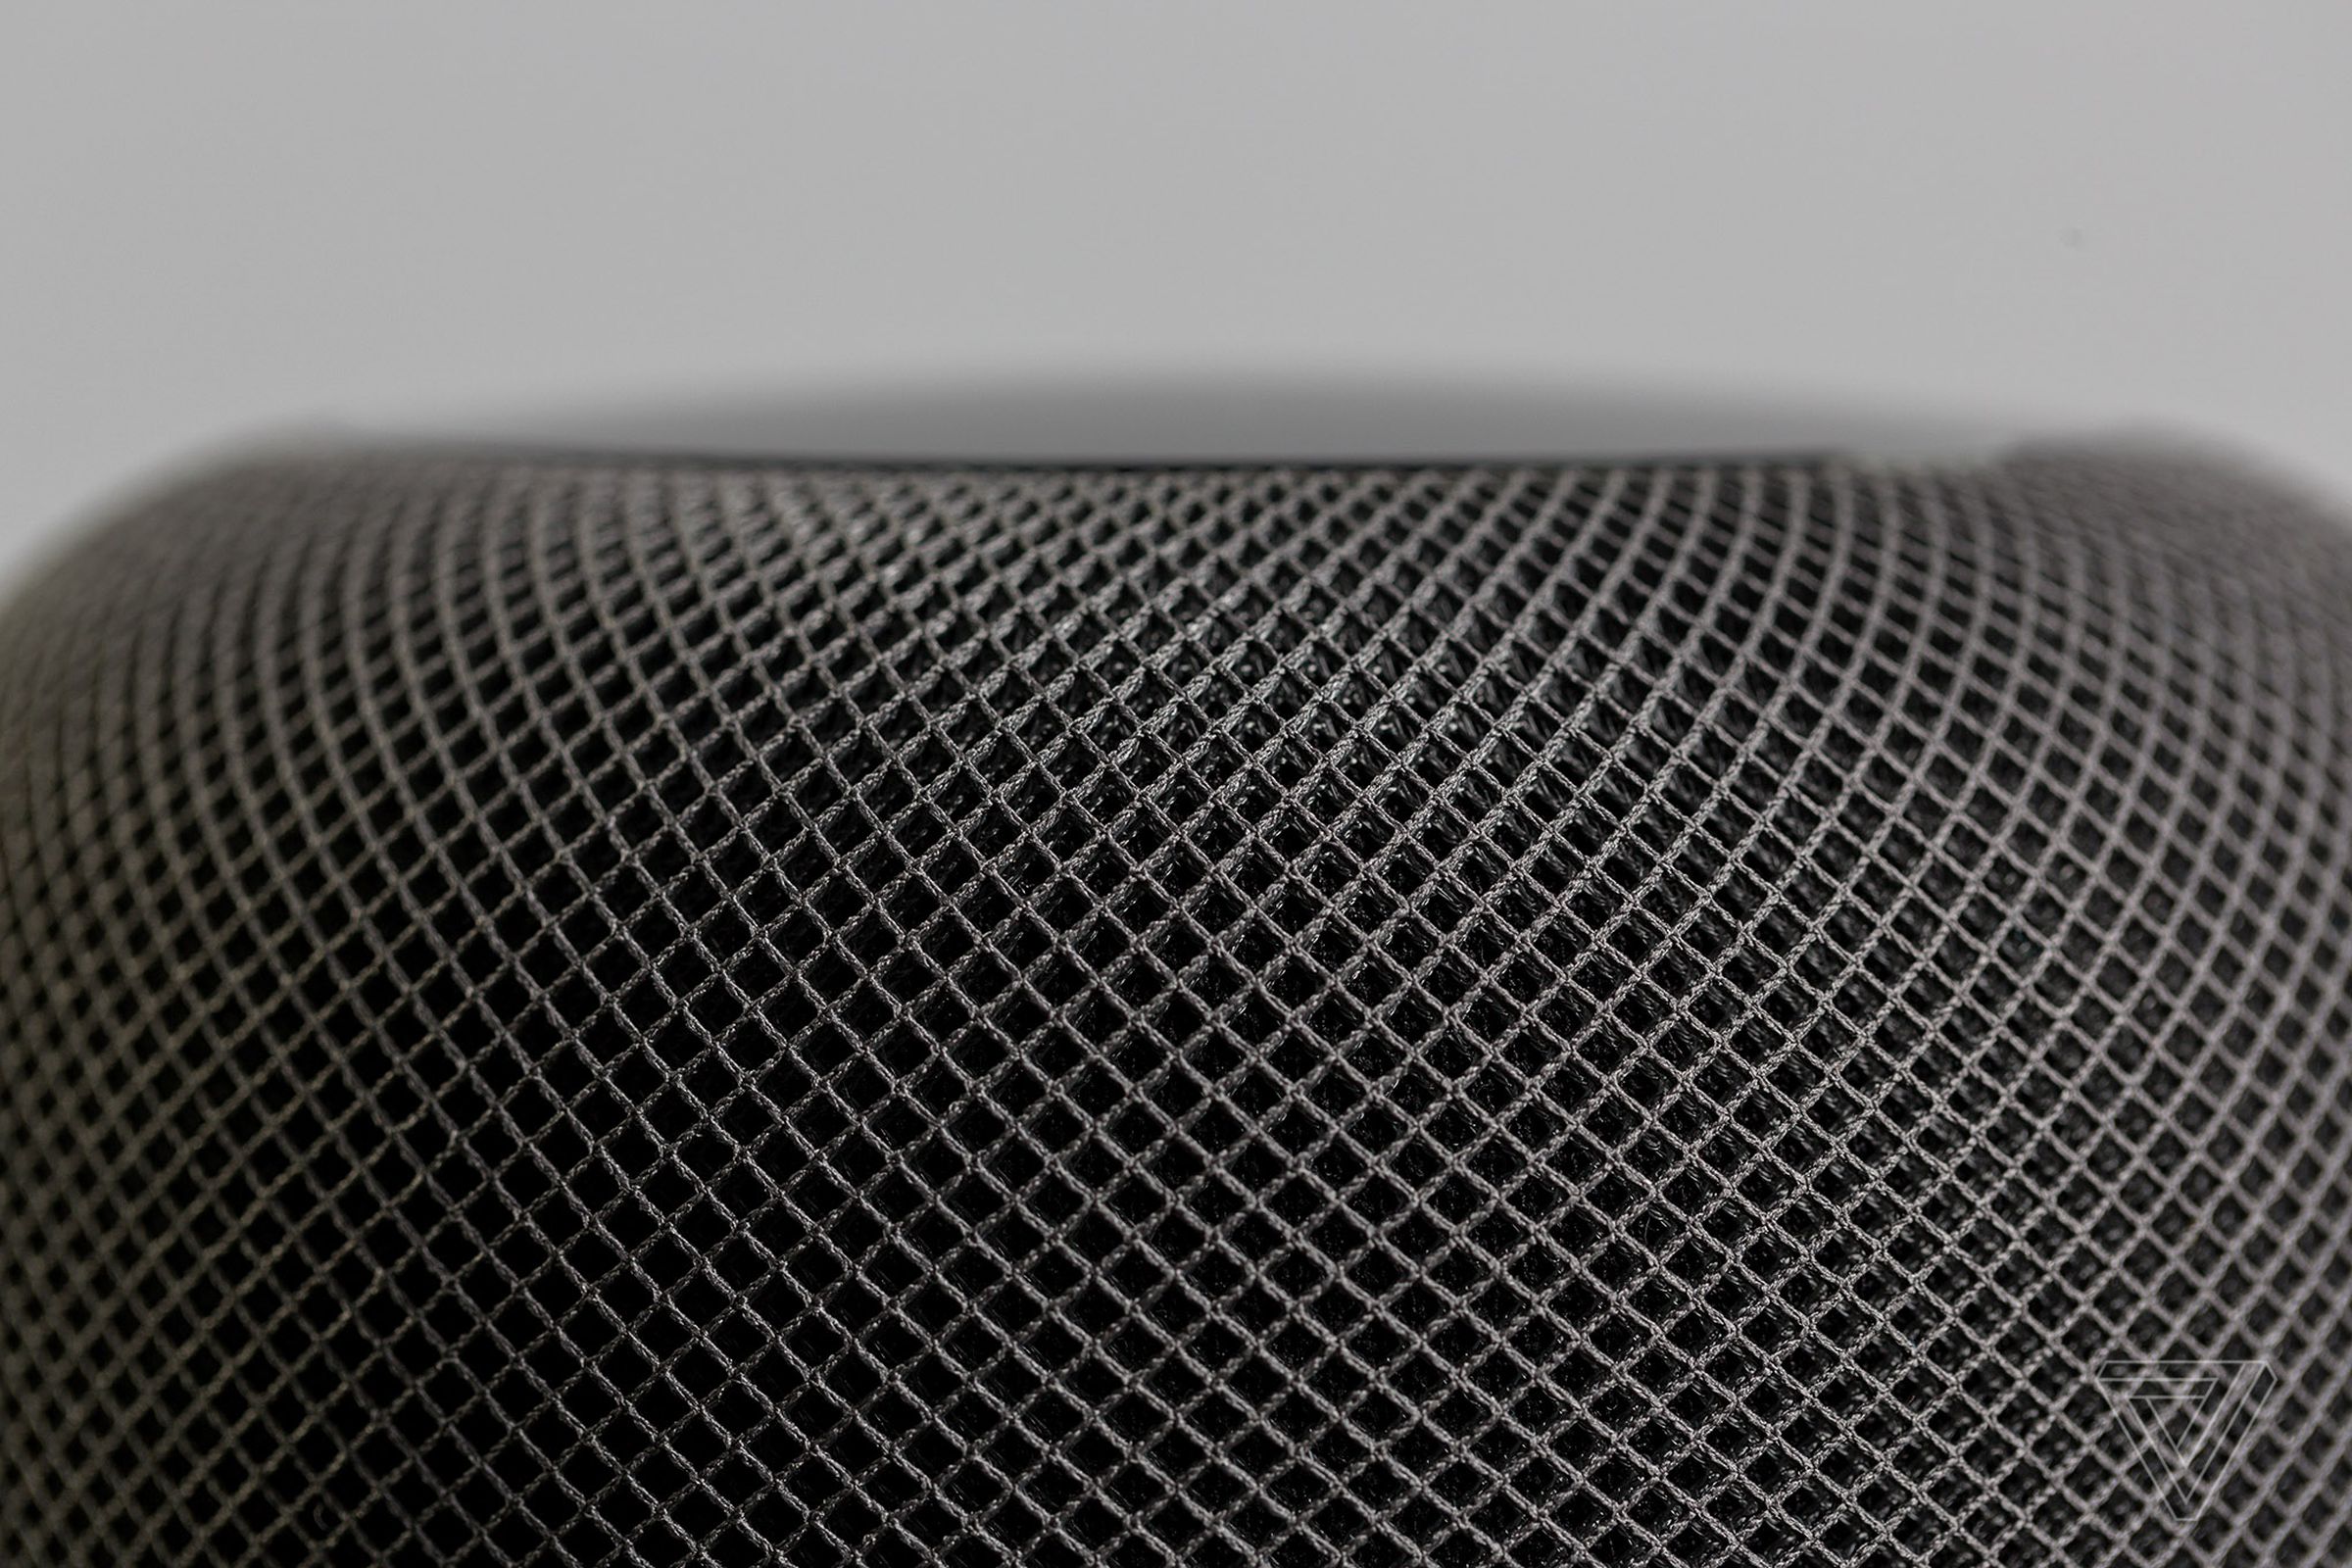 homepod grille